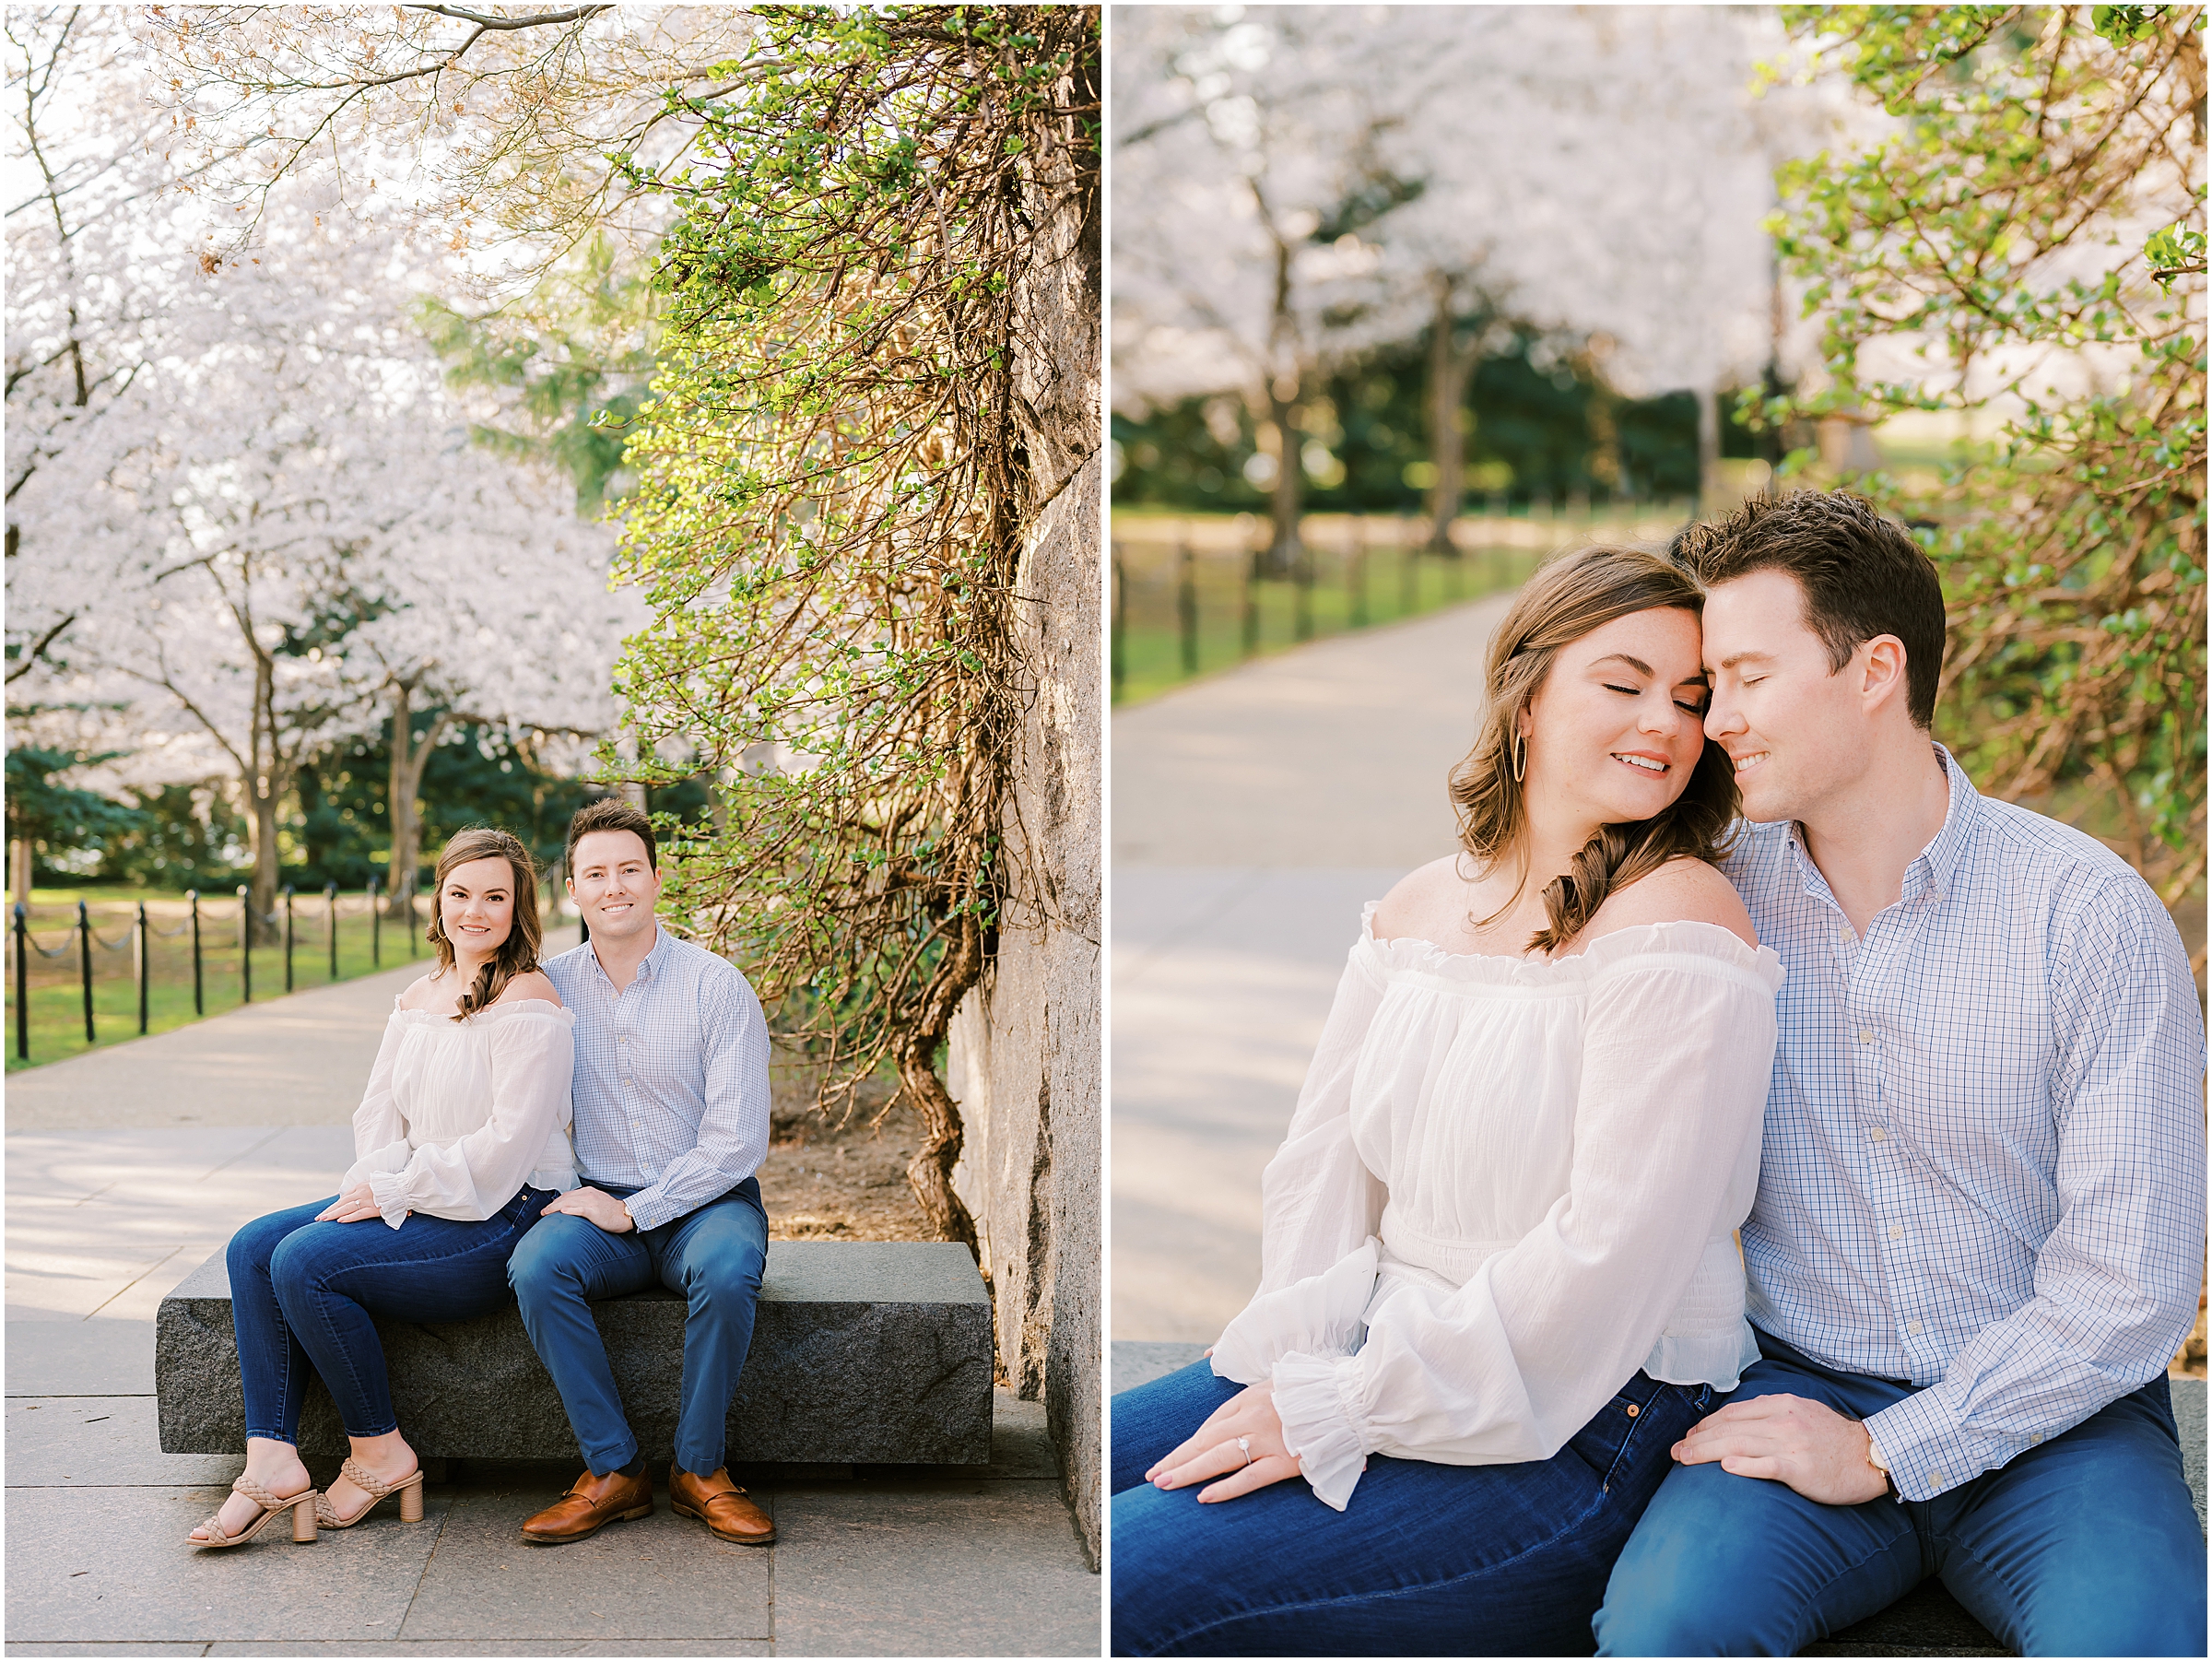 Engagement session in Washington D.C. during cherry blossoms